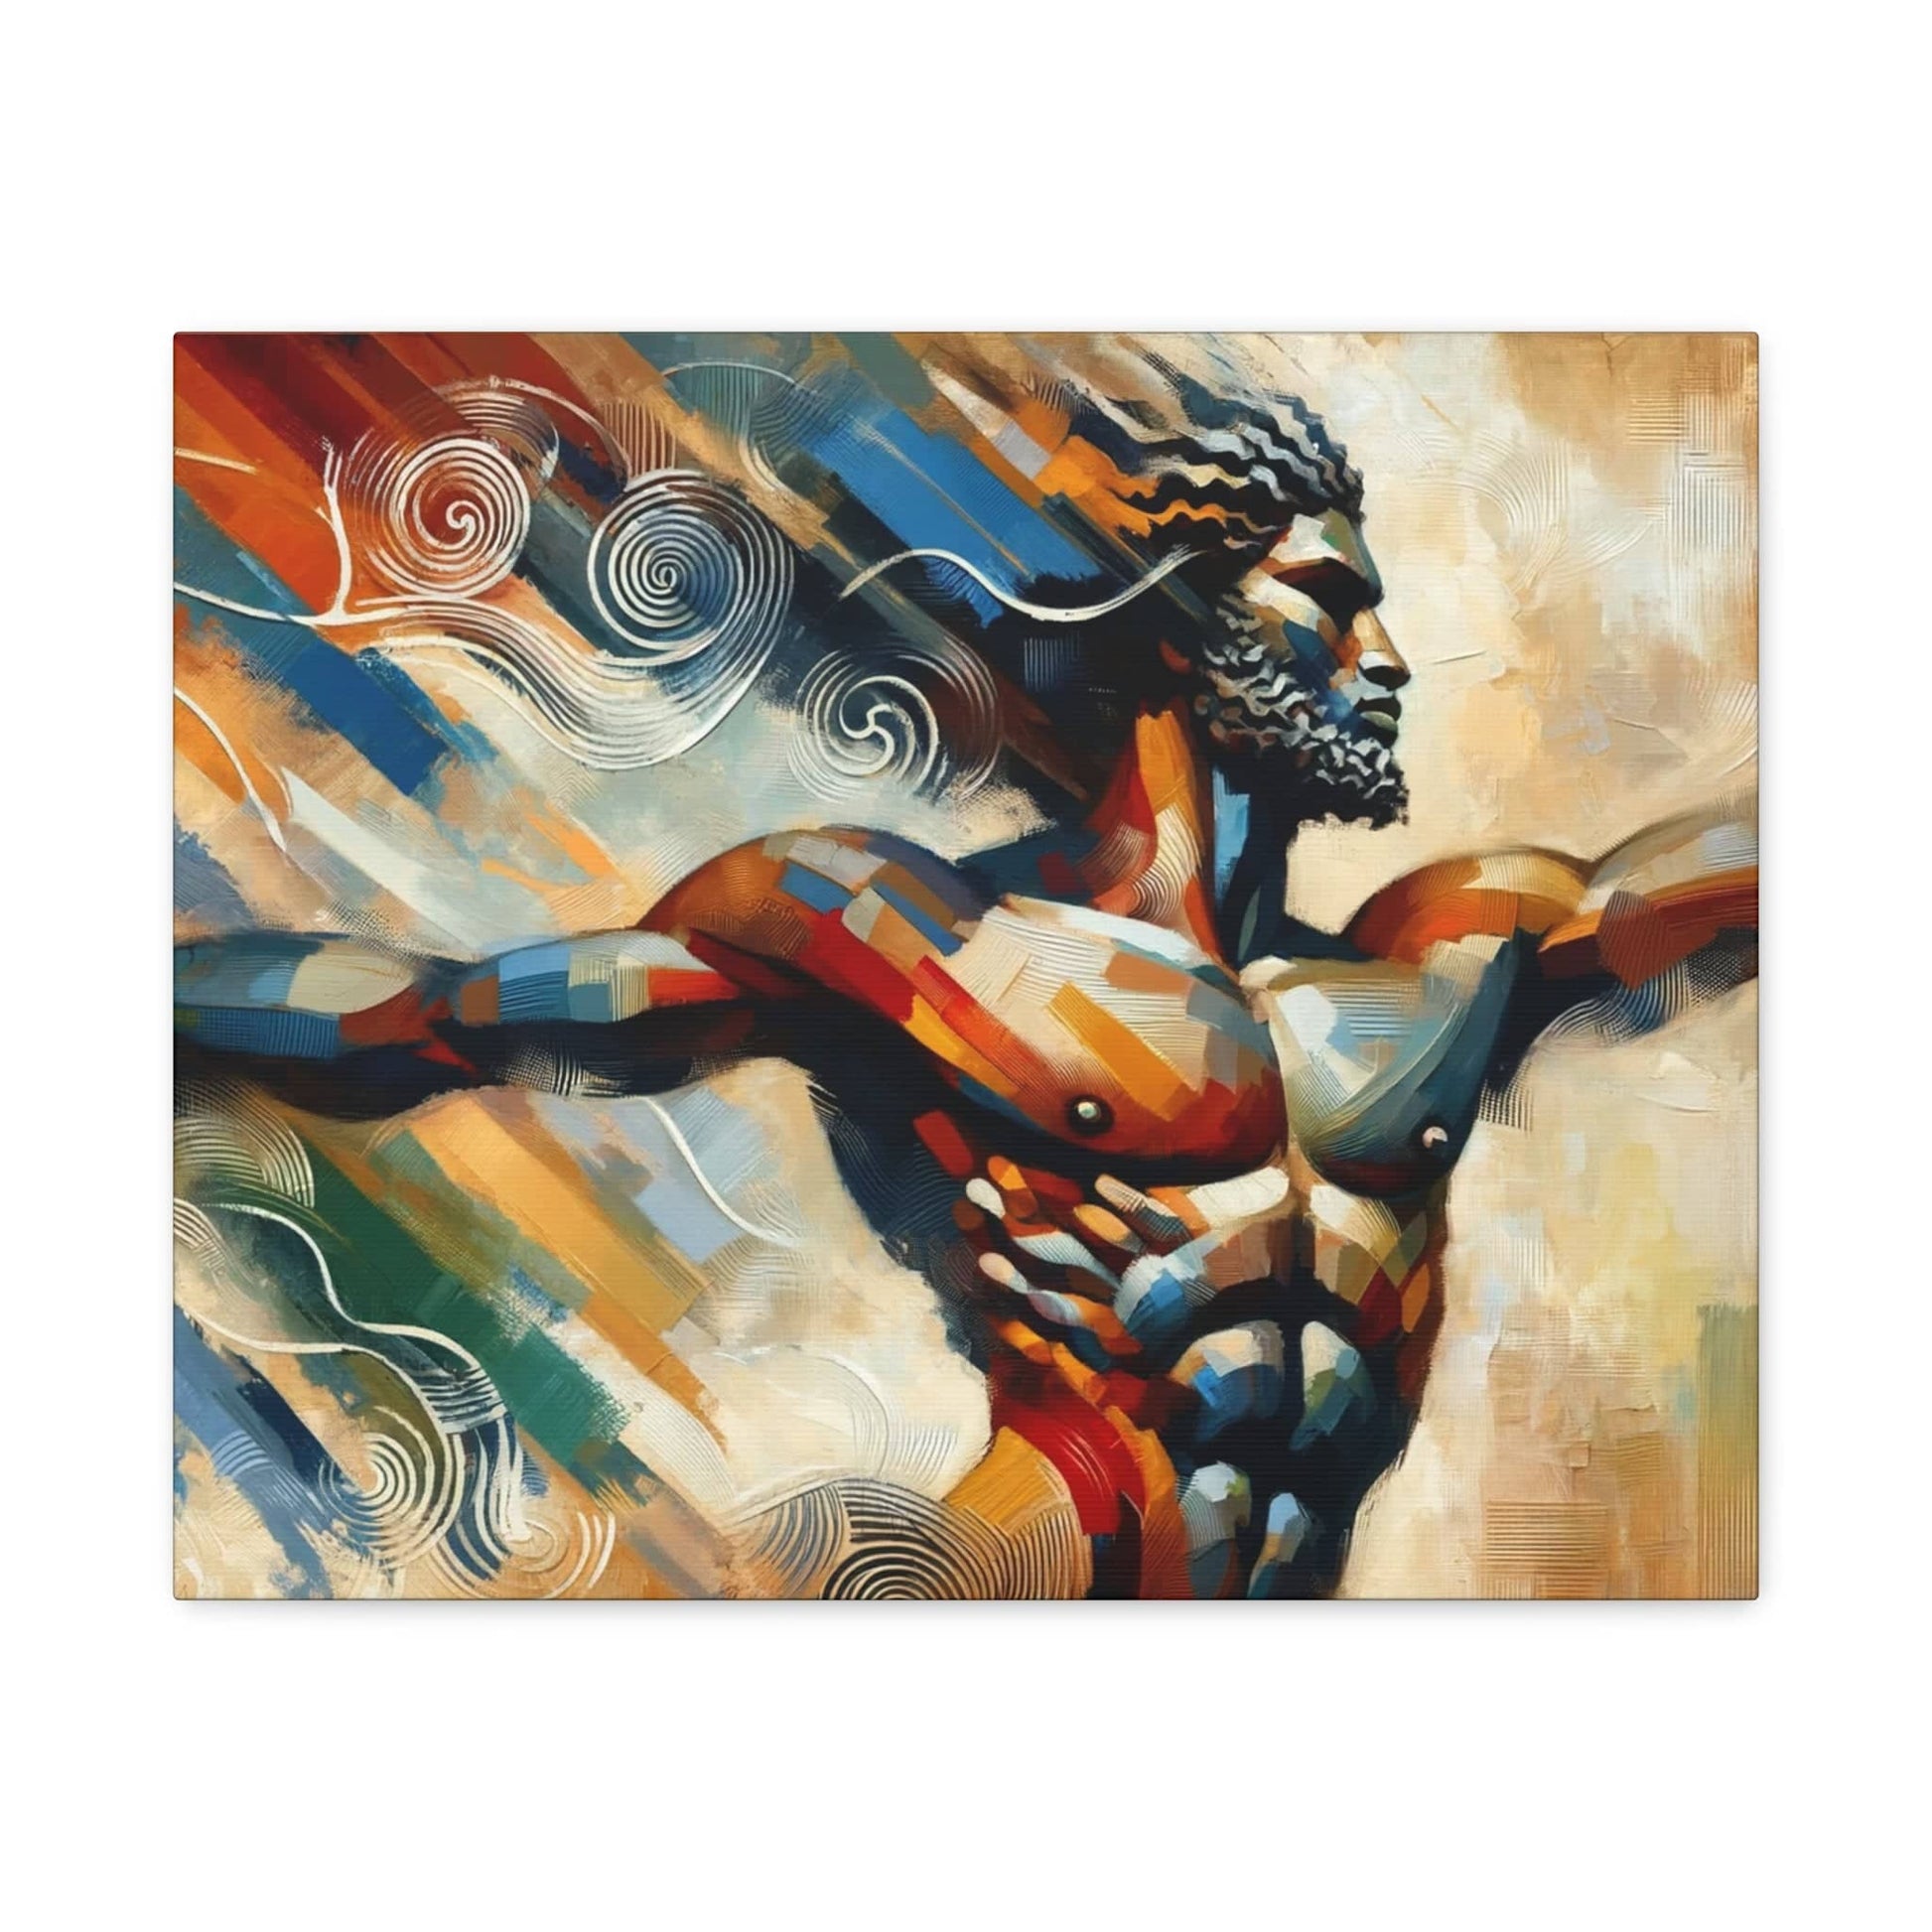 A Whirlwind Warrior Canvas Art depicting a Whirlwind Warrior with his arms outstretched, created by Printify.